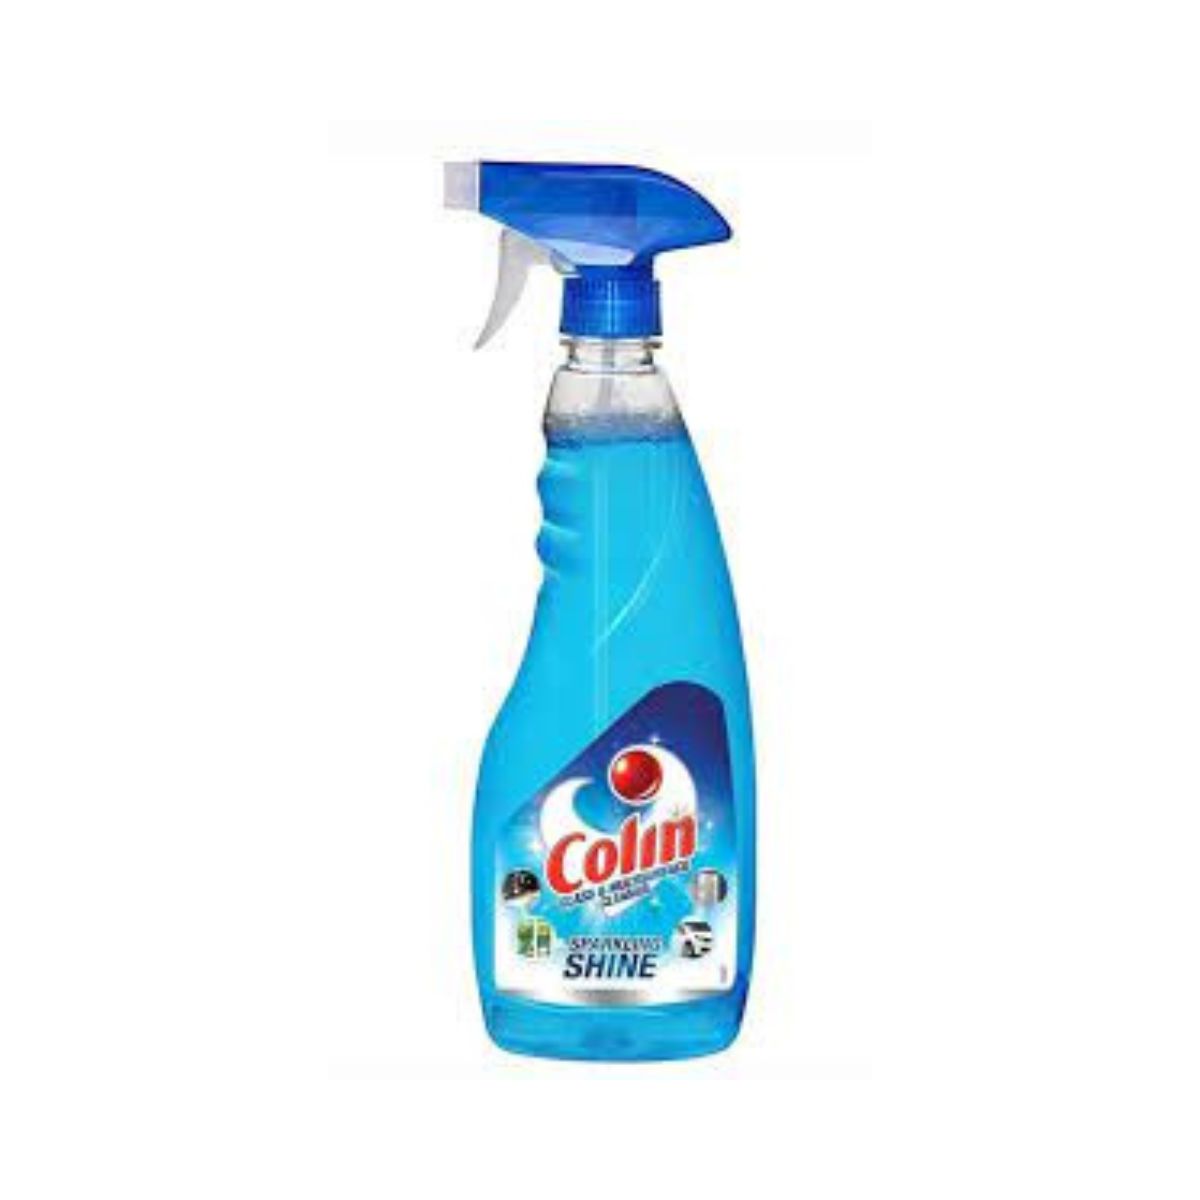 Colin Sparking Shine Glass & Multisurface Cleaner - 500ml